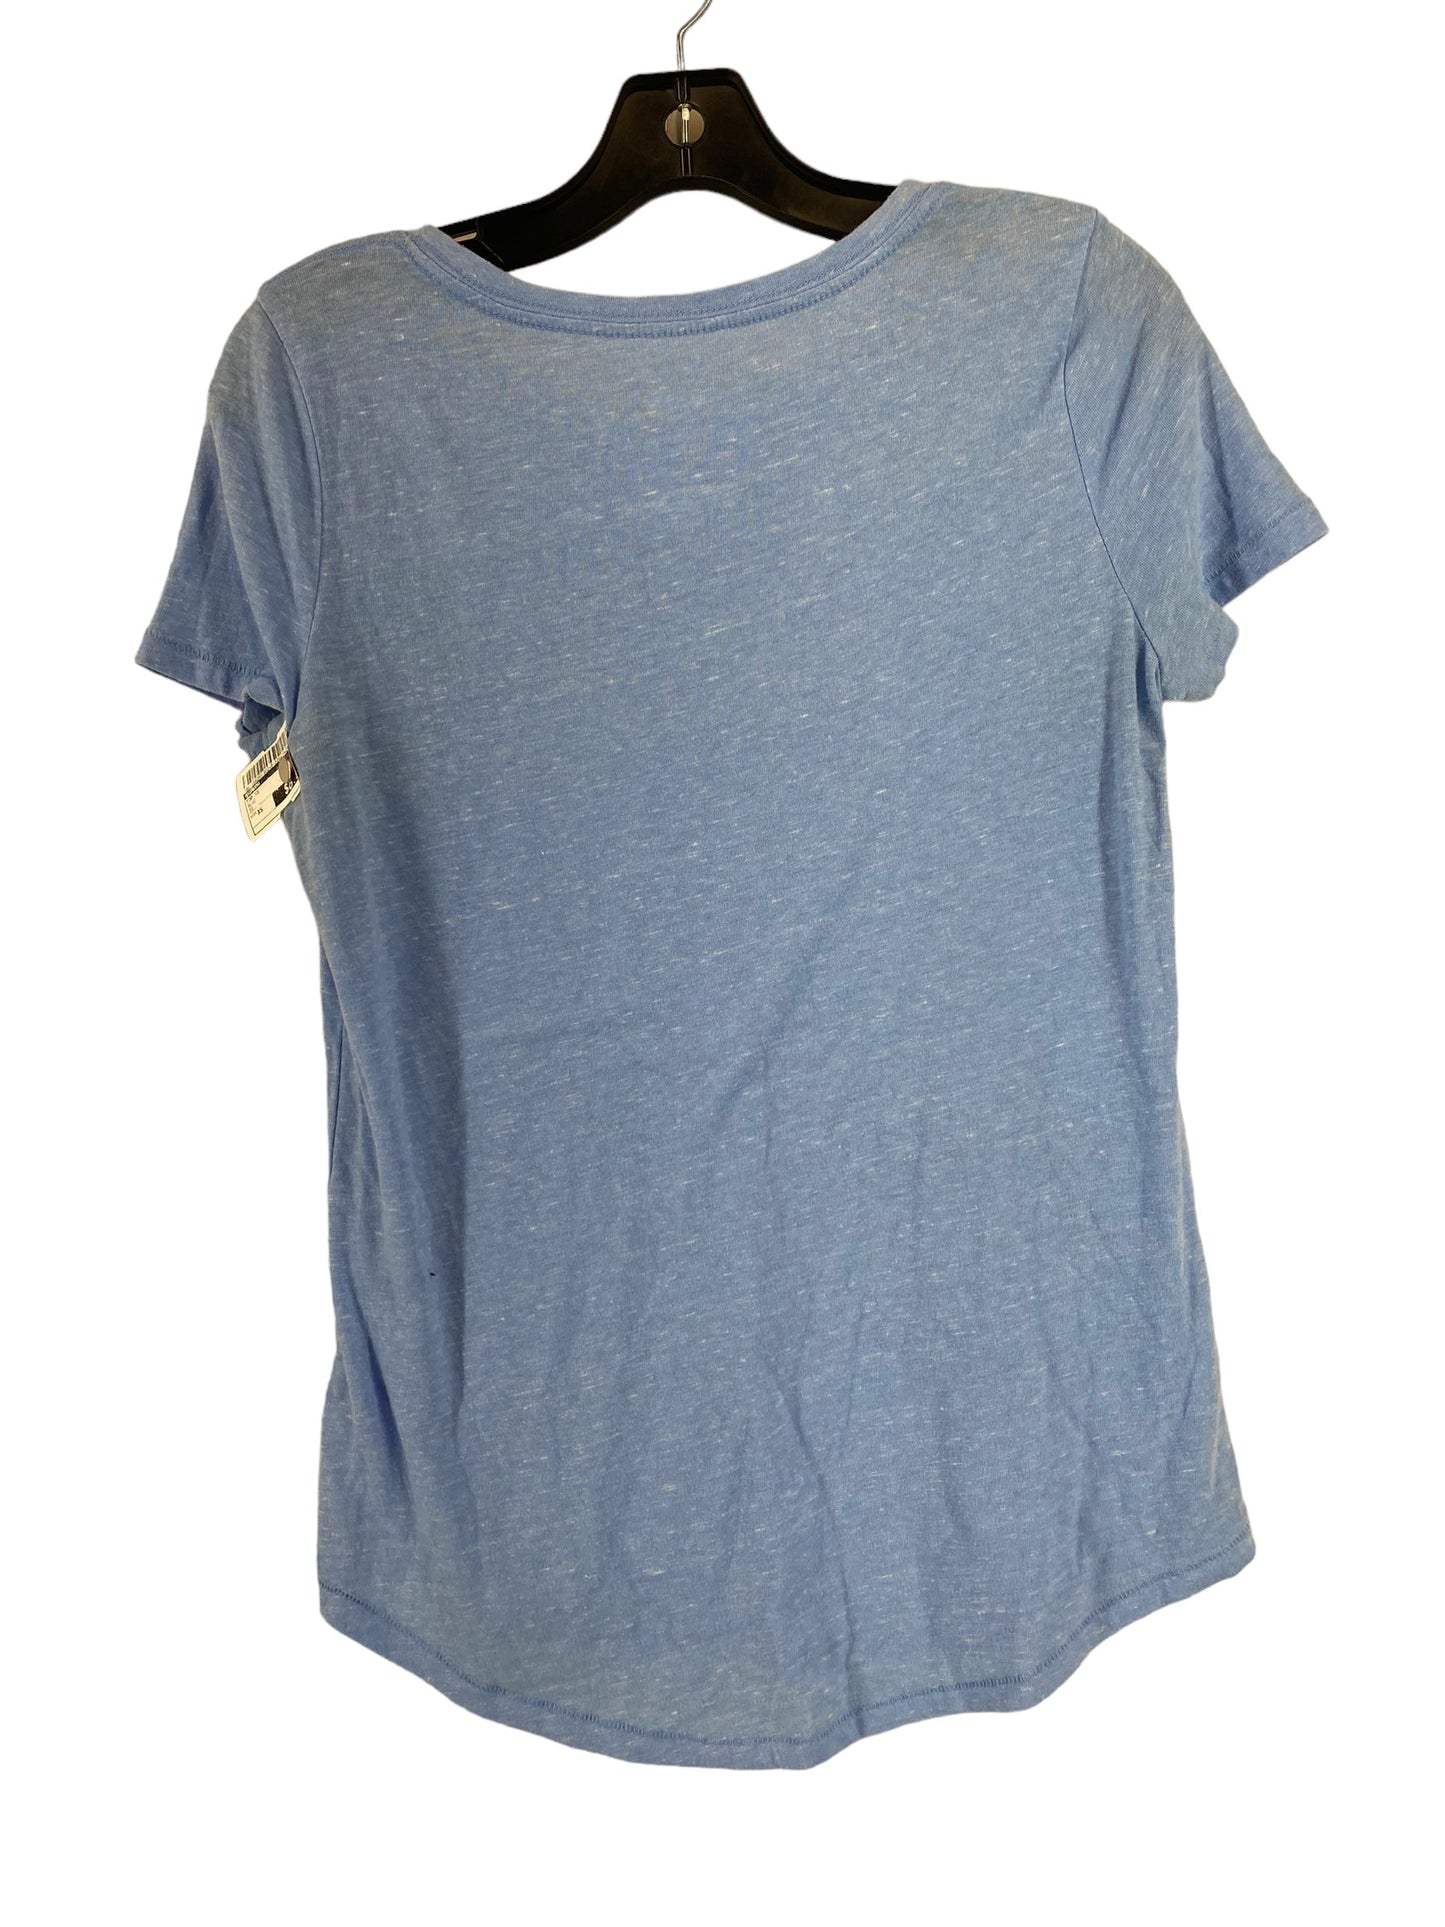 Top Short Sleeve By Sonoma  Size: Xs